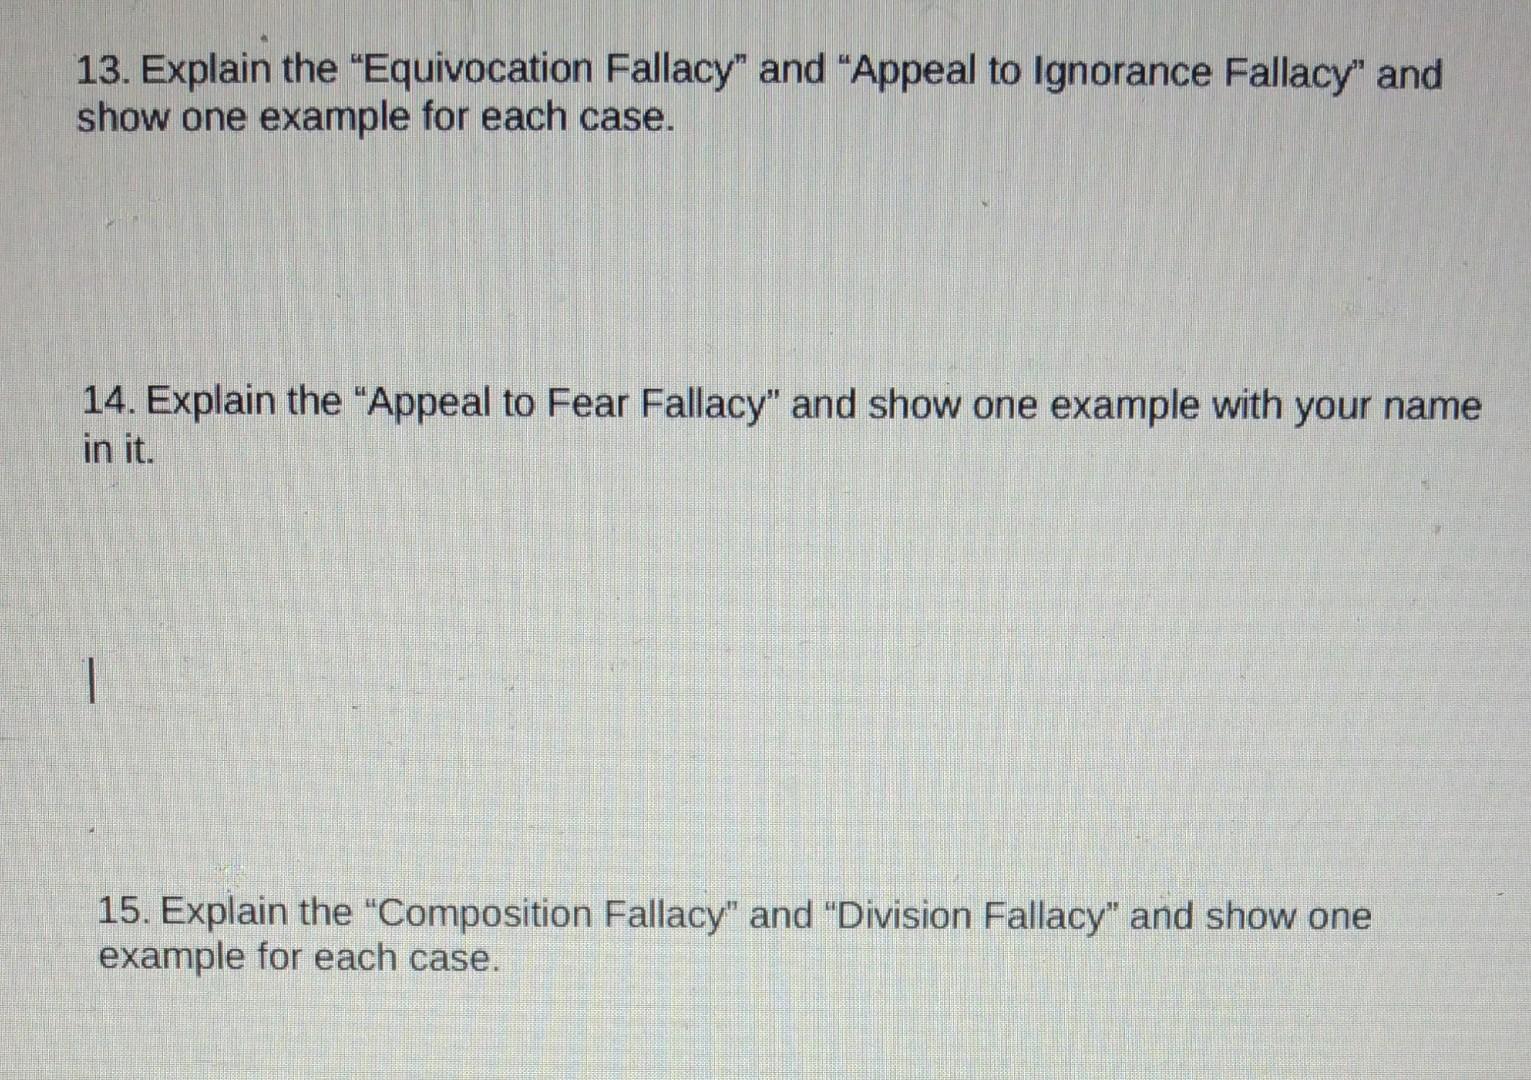 appeal to ignorance fallacy